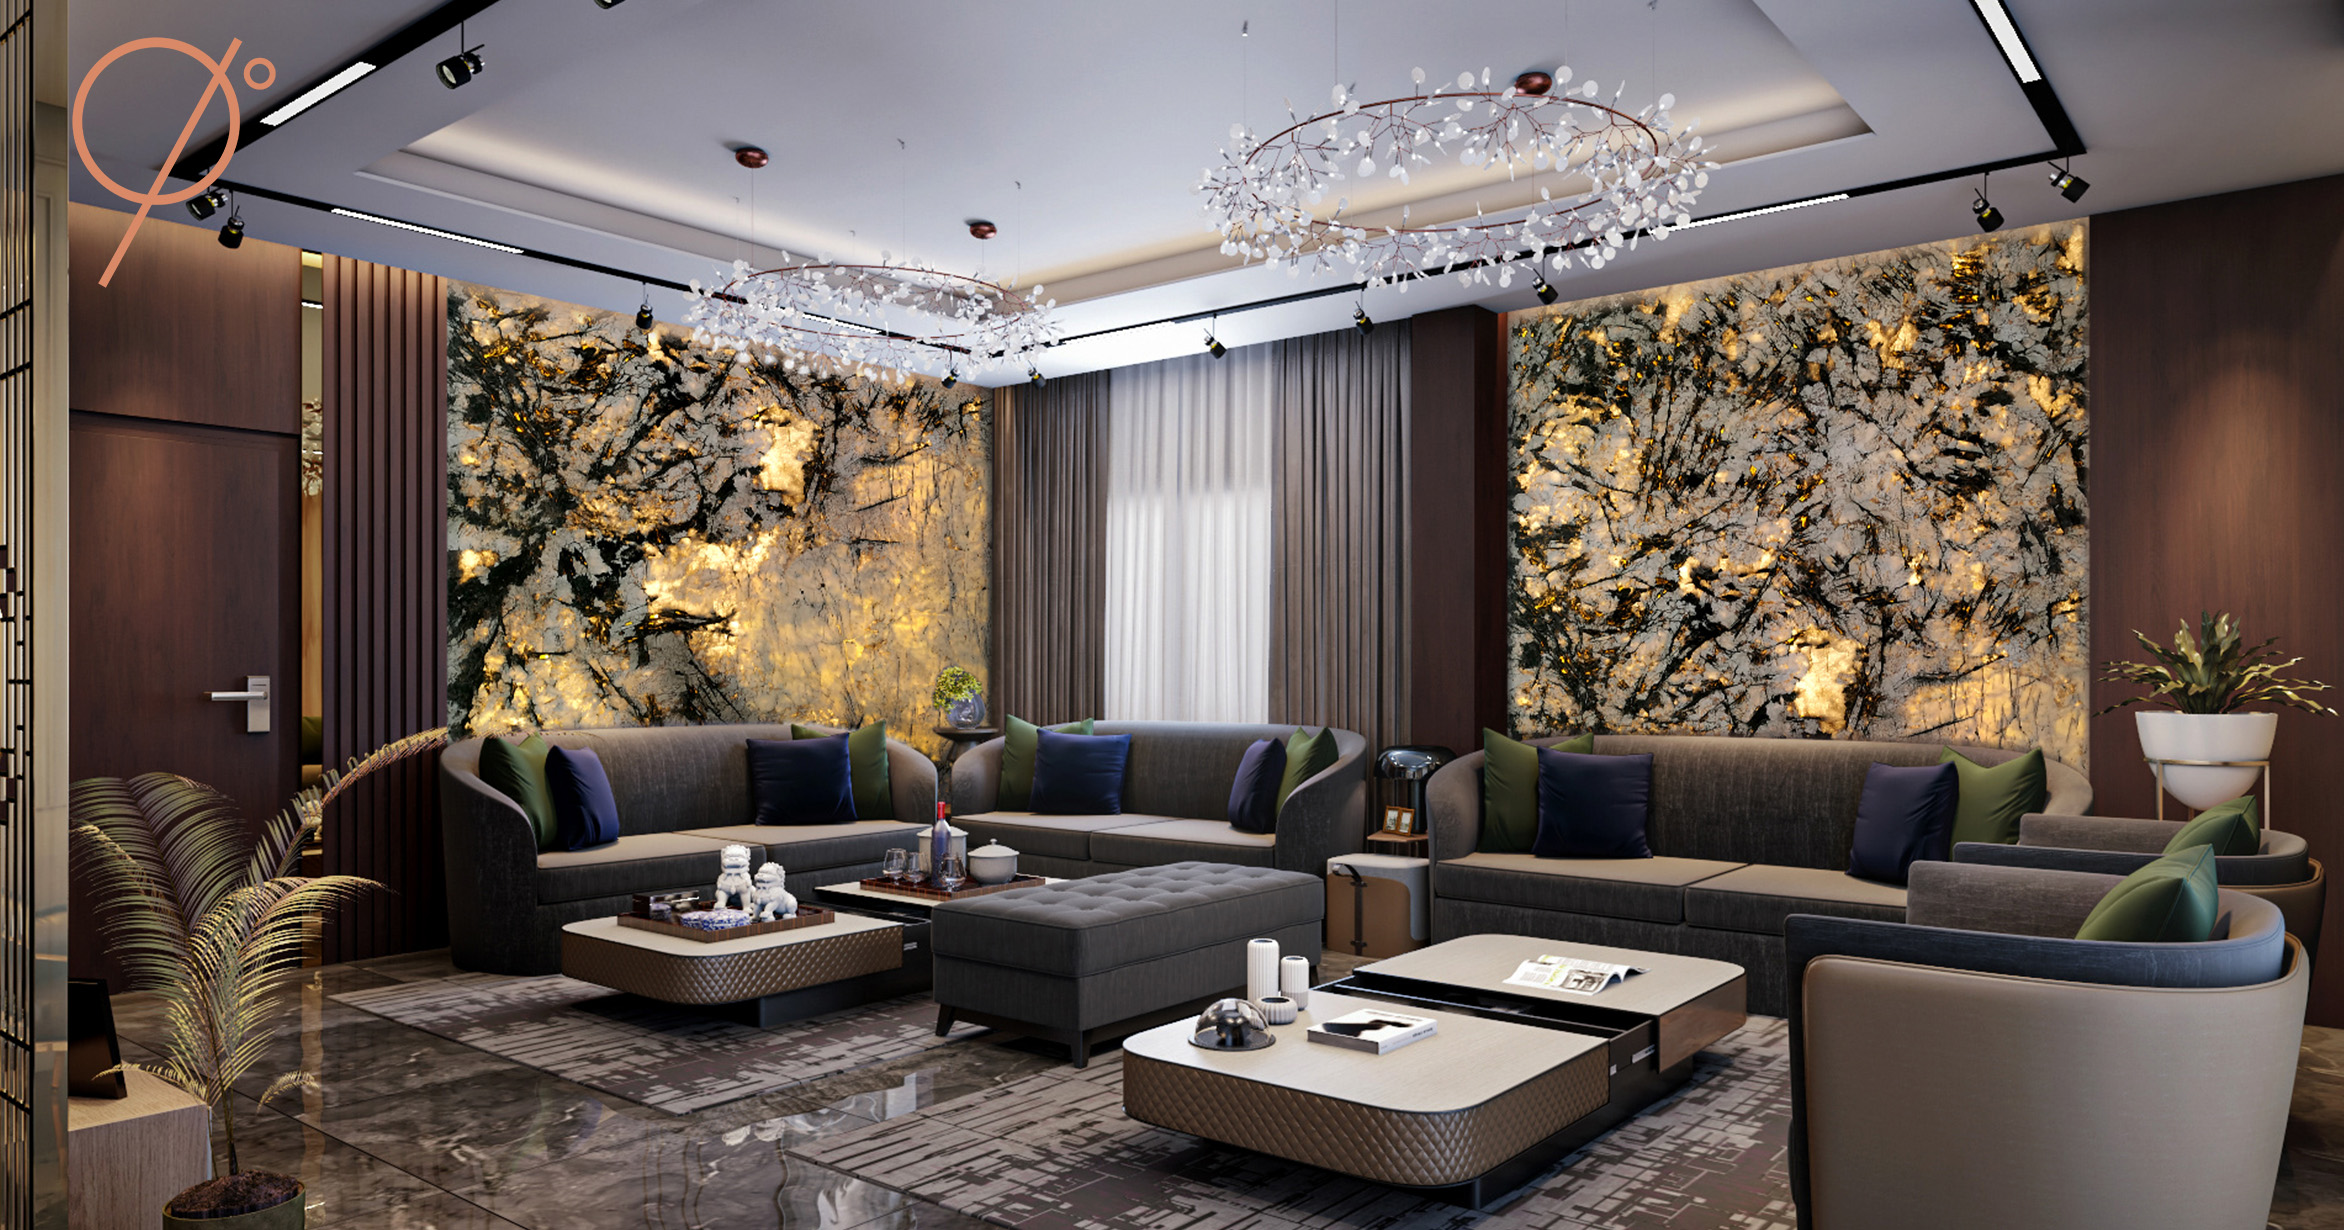 Adding a touch of nature's finesse to the luxurious living room, the backlit quartzite slabs are attractive in their own right. Backlit Stones in Interior Design Trends: Ninety Degree Stone